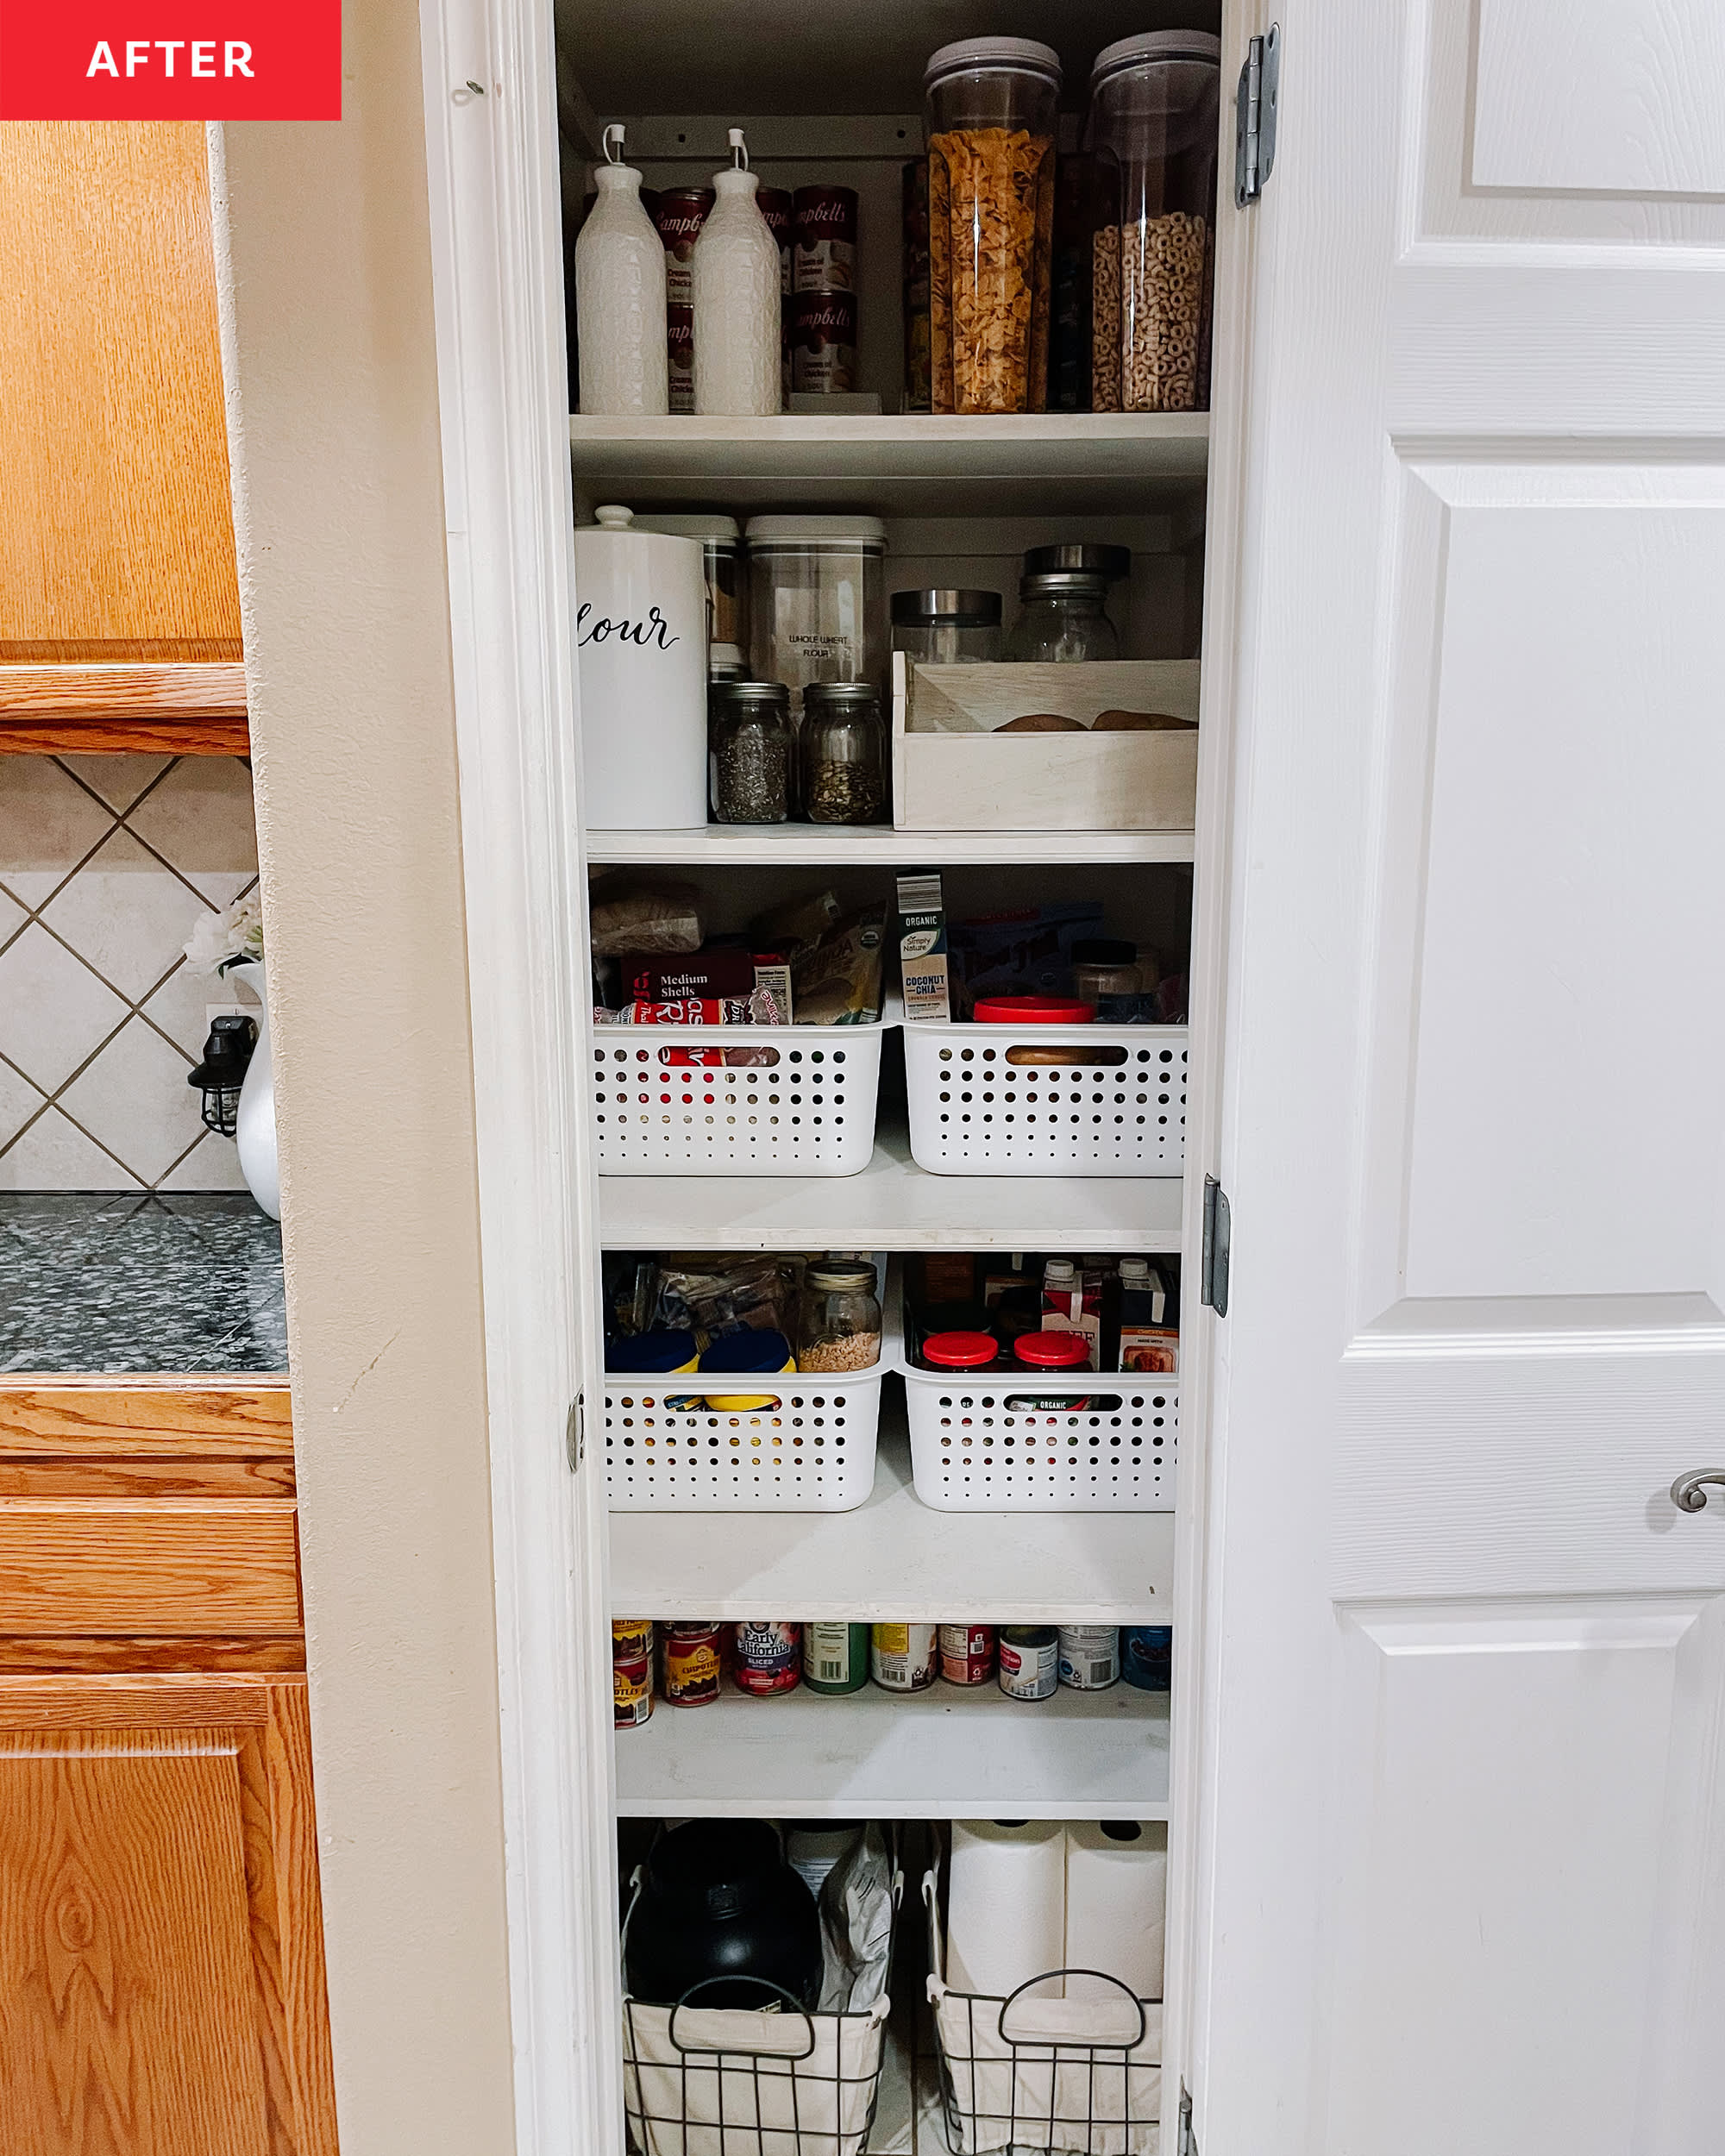 https://cdn.apartmenttherapy.info/image/upload/v1687967875/at/organize-clean/before-after/jessica-d-pantry/pantry-after-tag.jpg